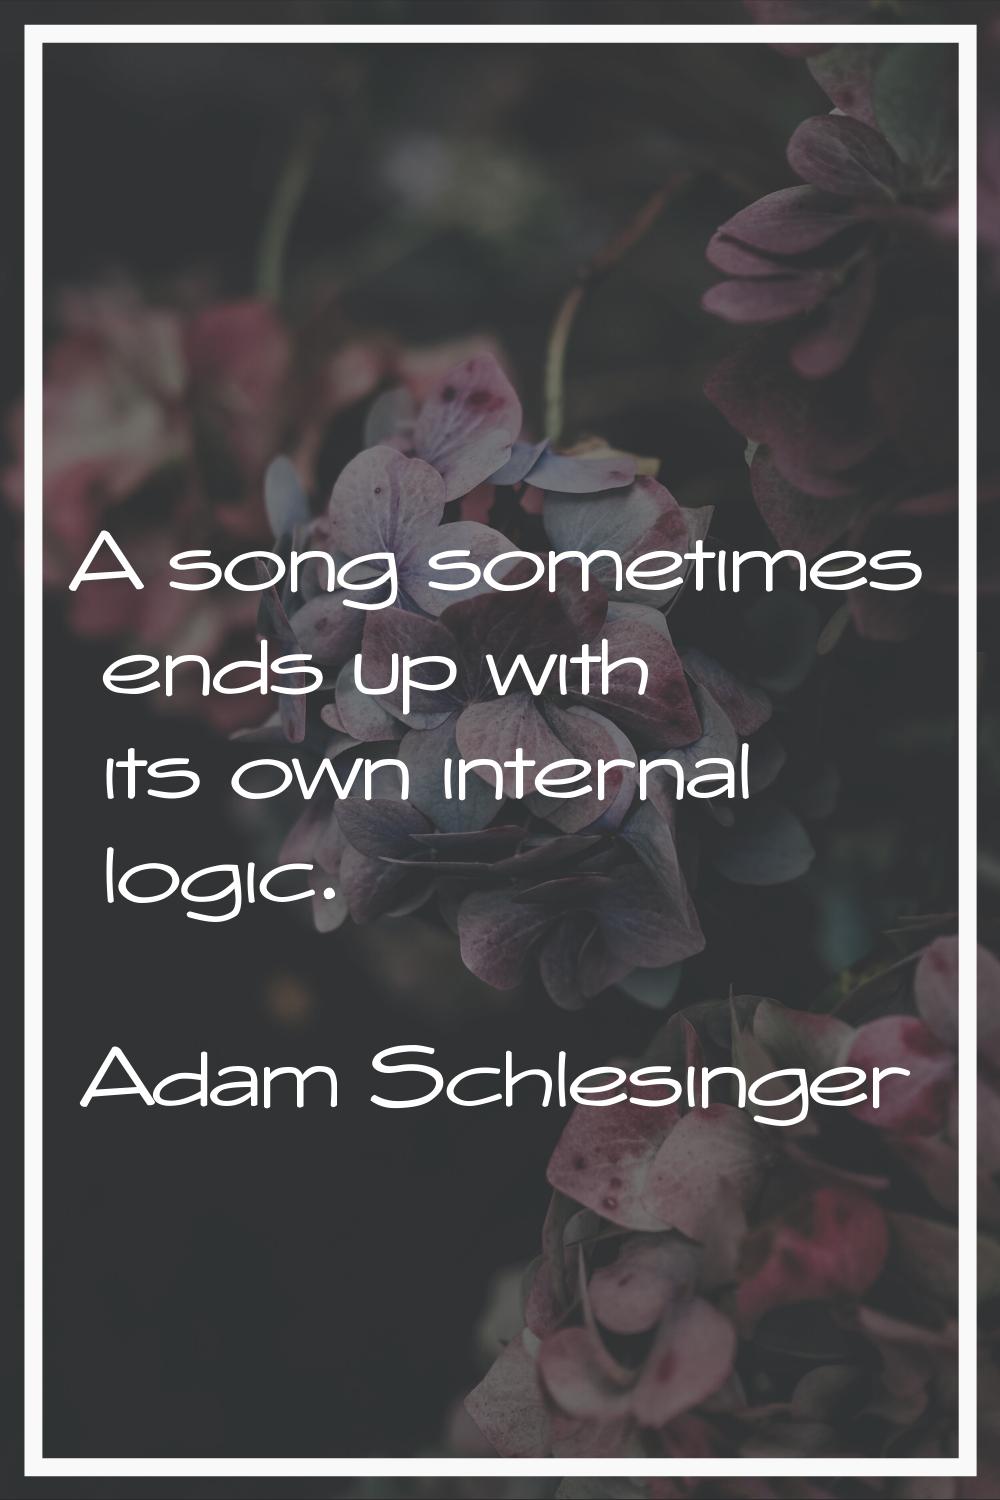 A song sometimes ends up with its own internal logic.